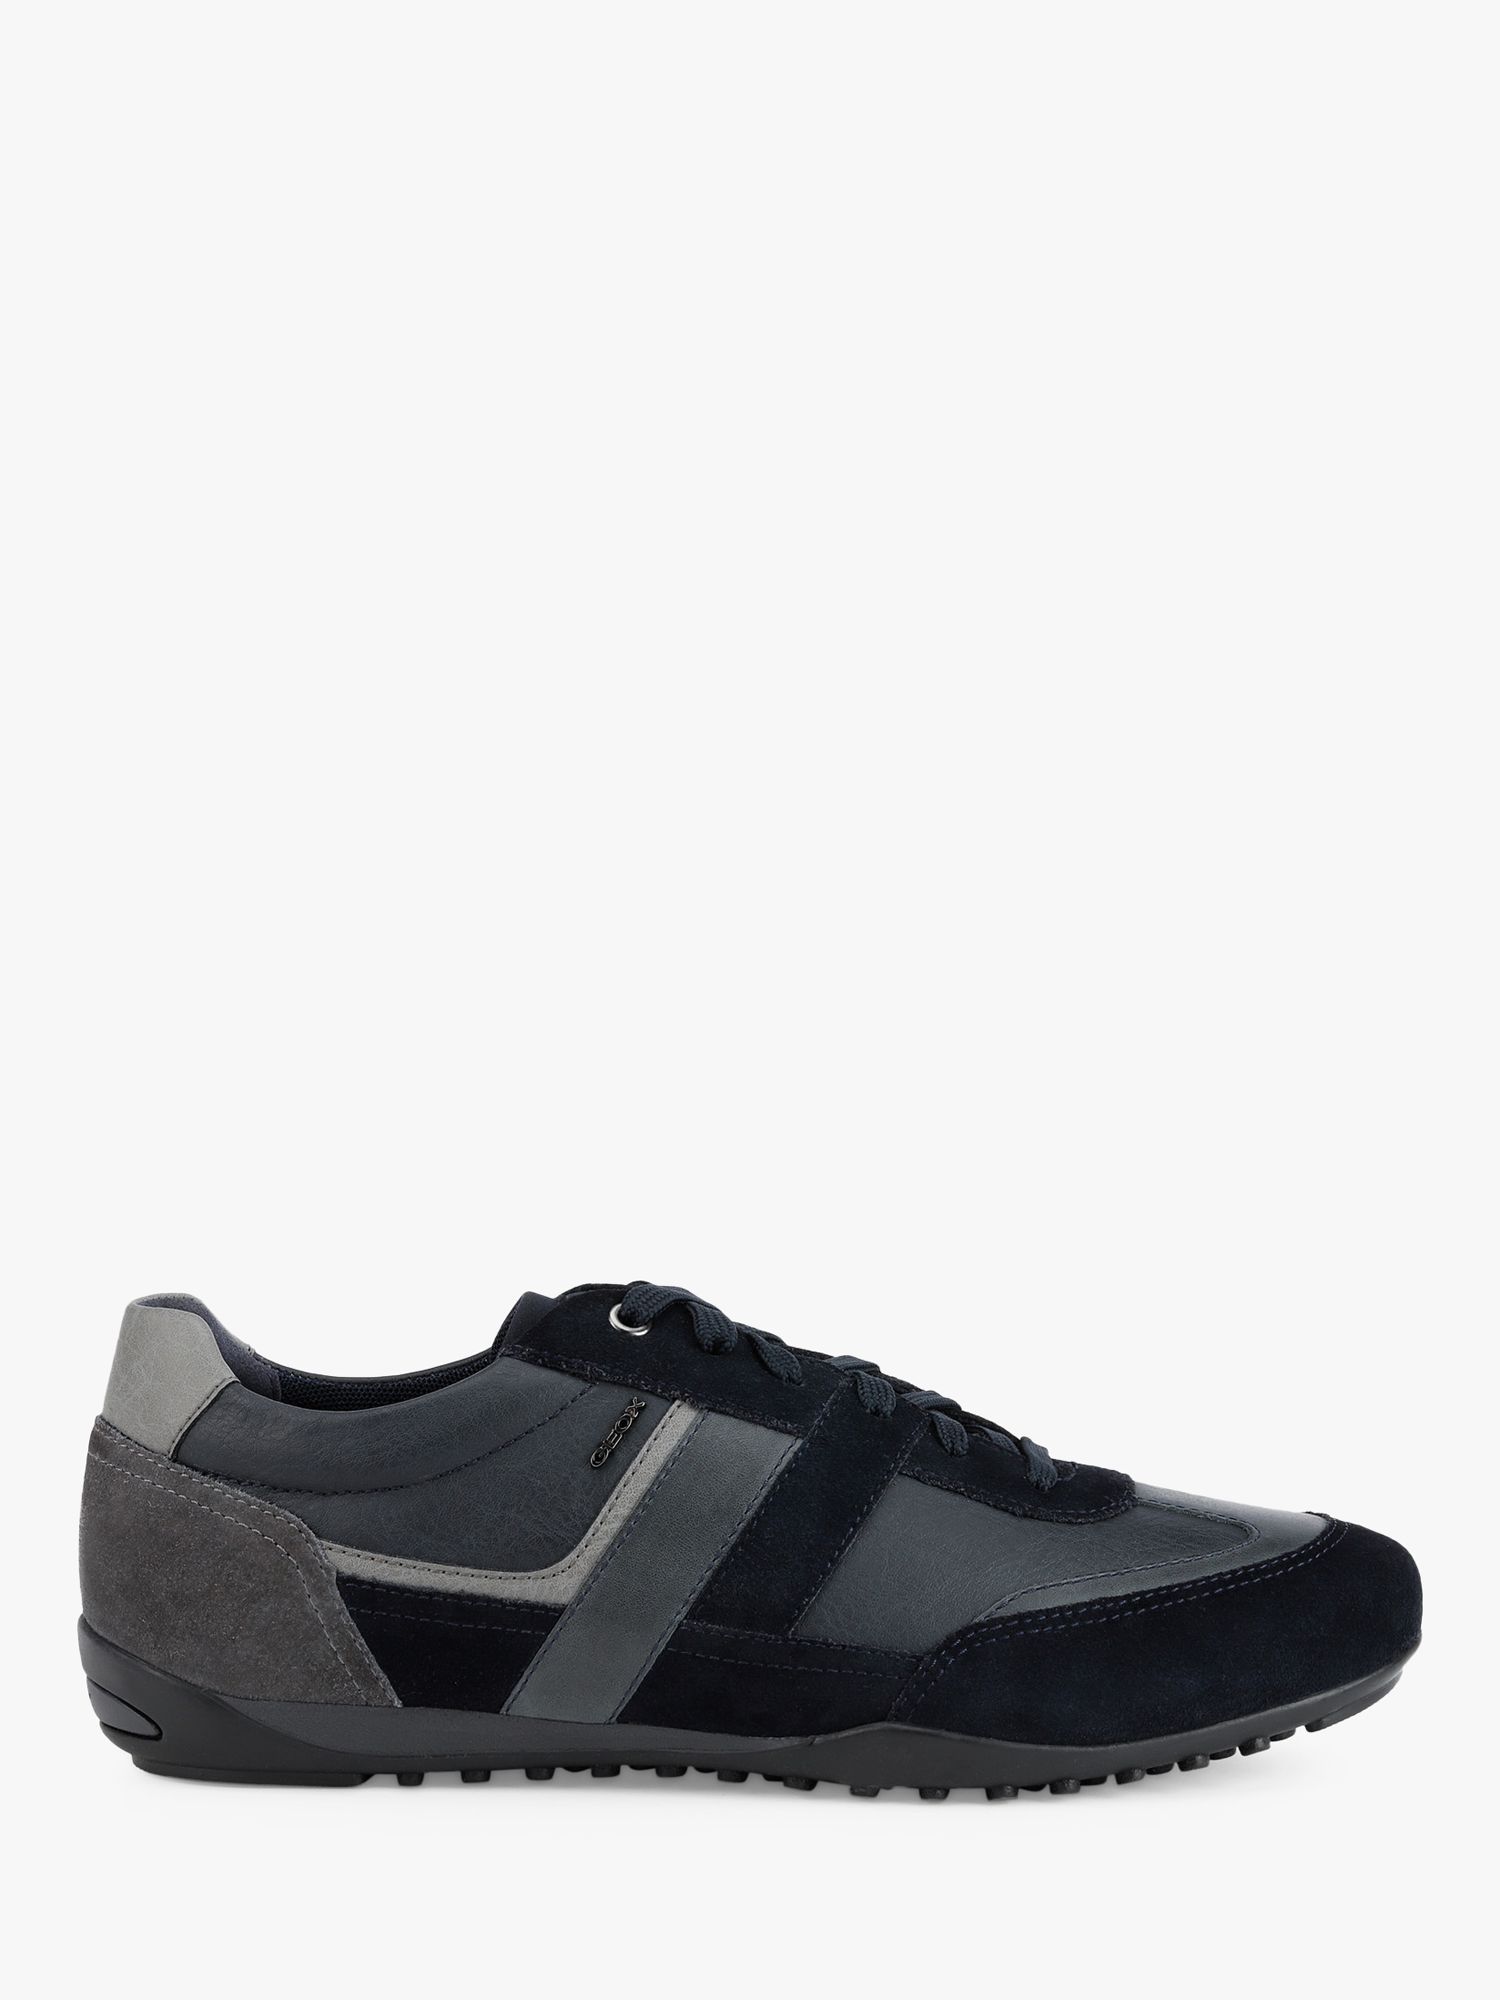 Geox Wells Suede Lace Up Trainers, at John Lewis & Partners